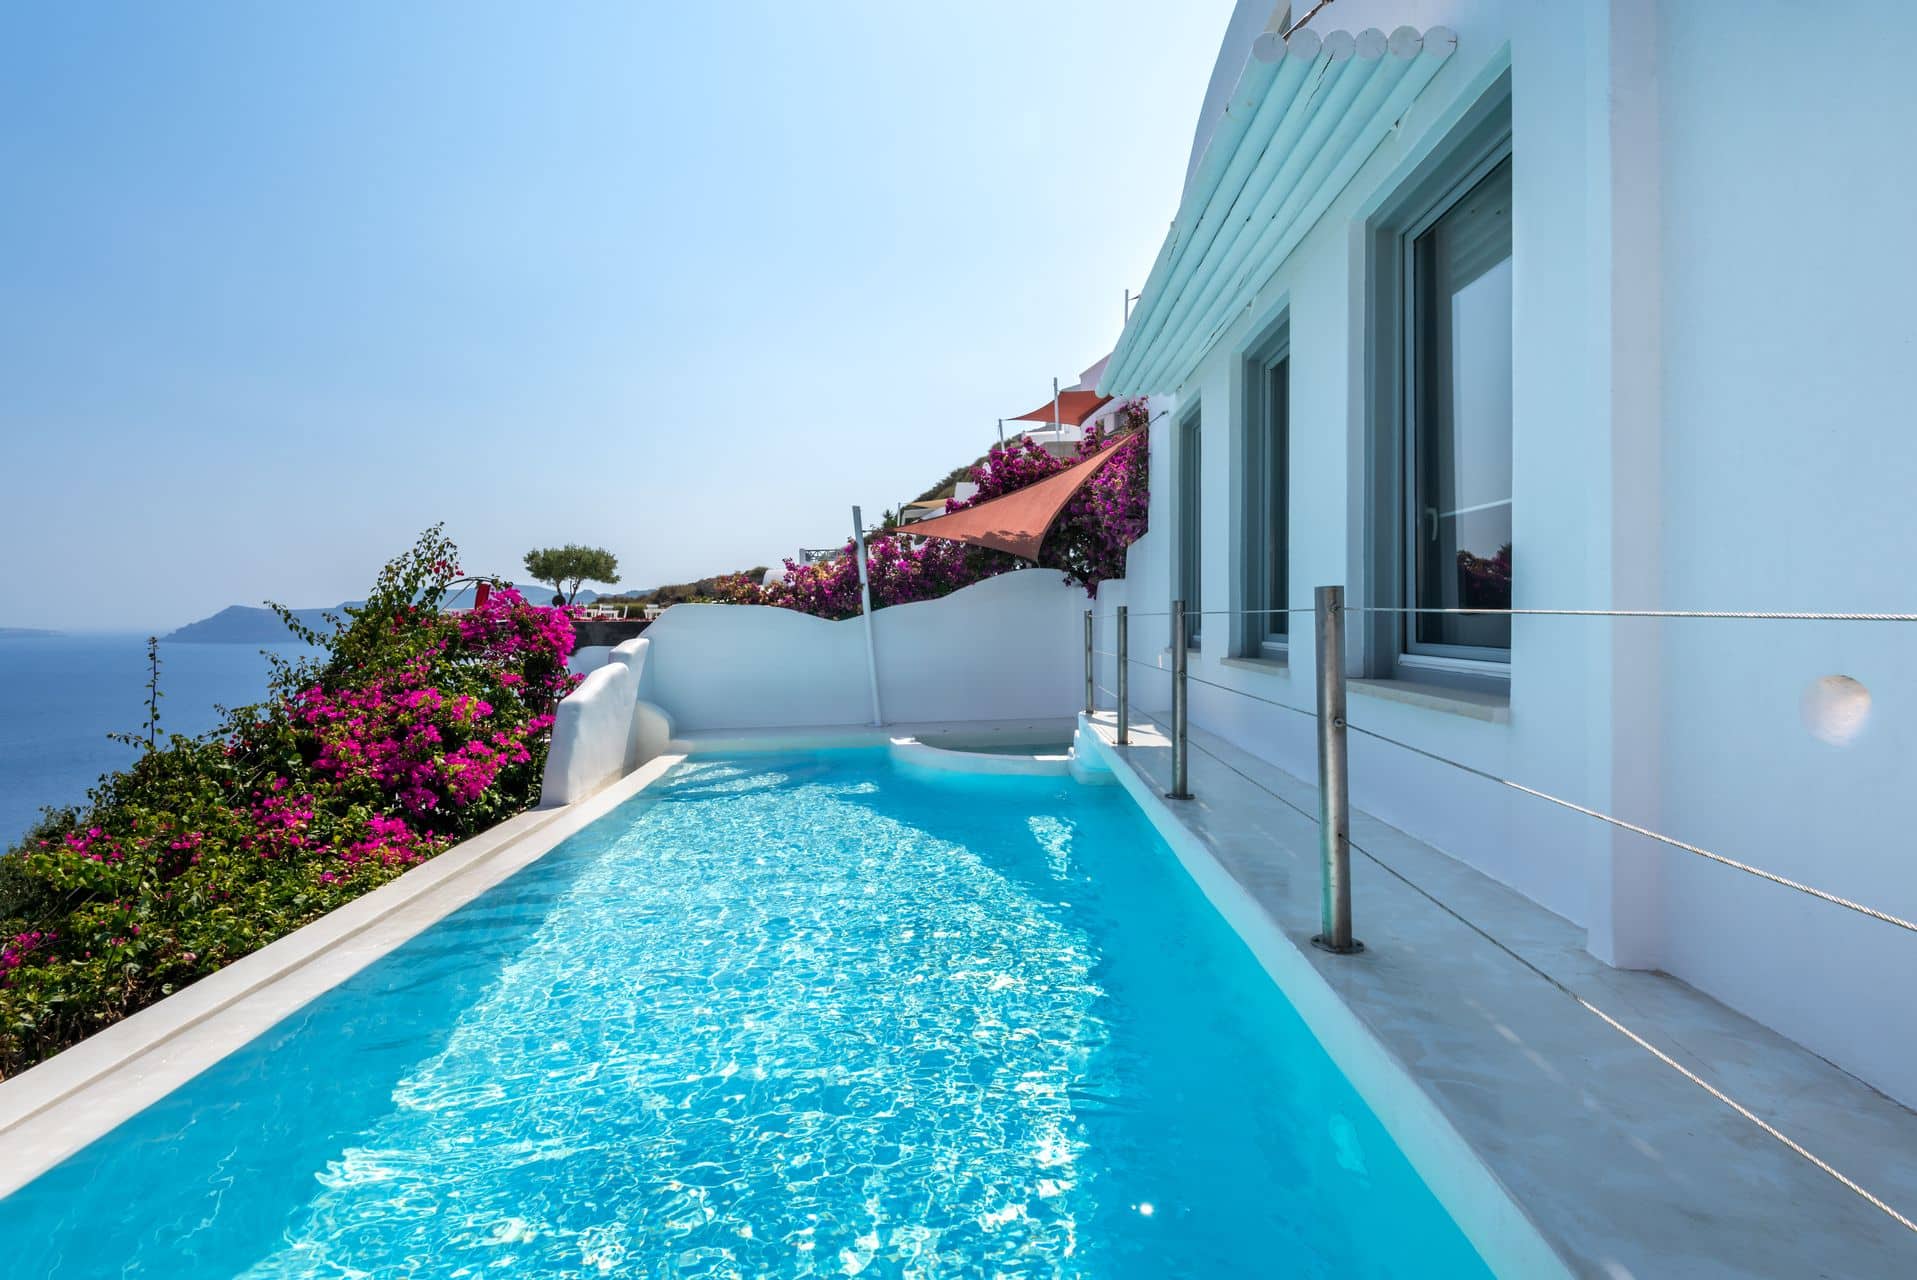 Luxurious stay at Oia Santorini infinity pool villa of Andronis Luxury Suites